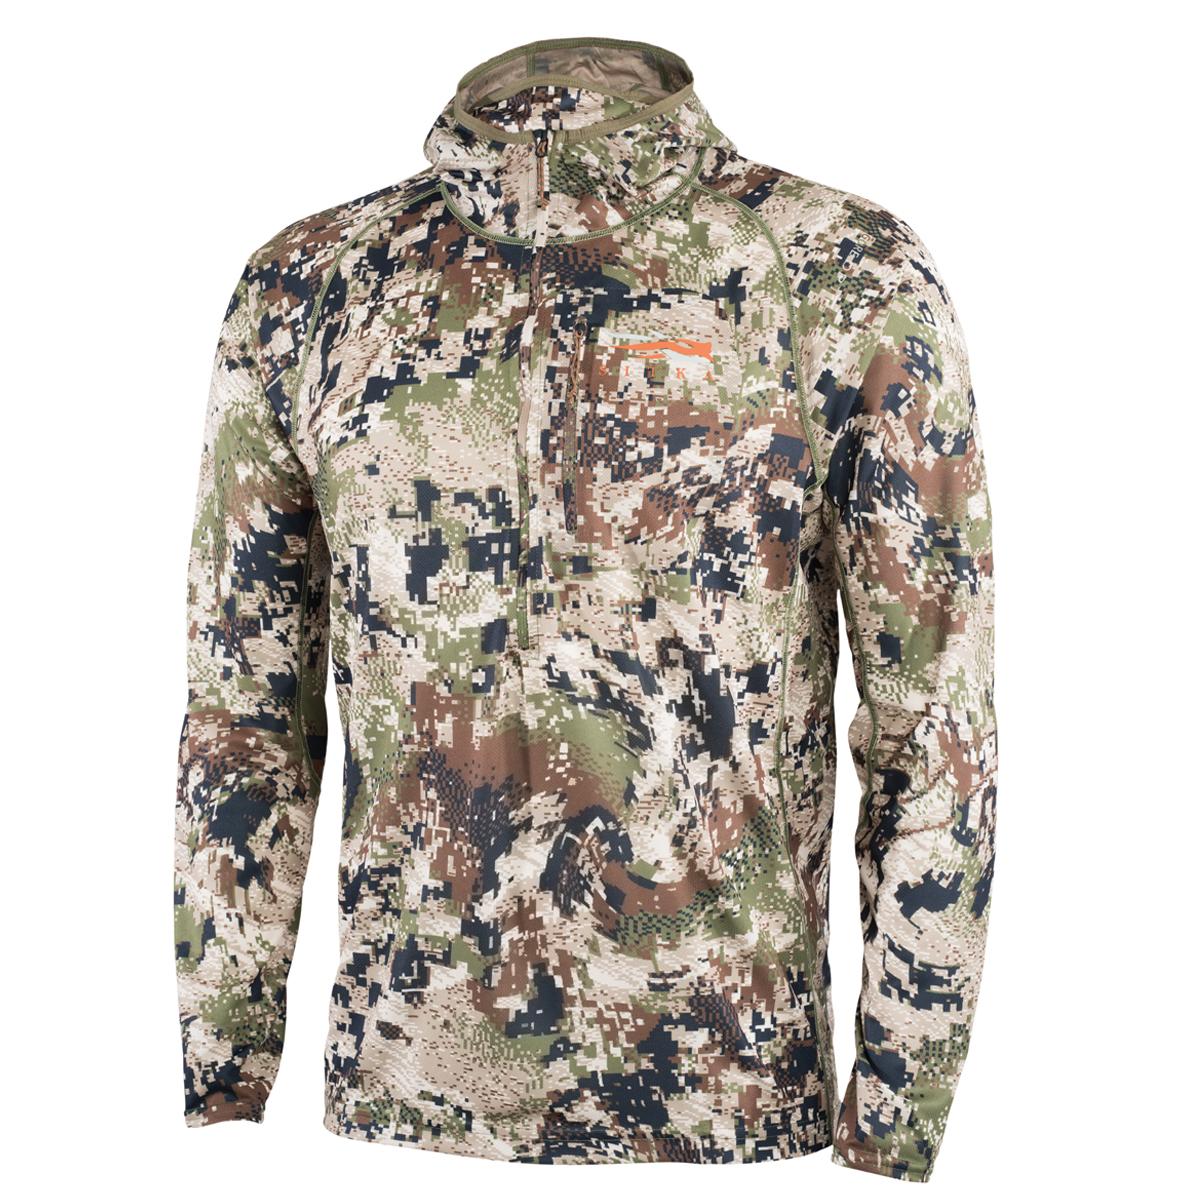 Trail’s top five favorite SITKA pieces - 6